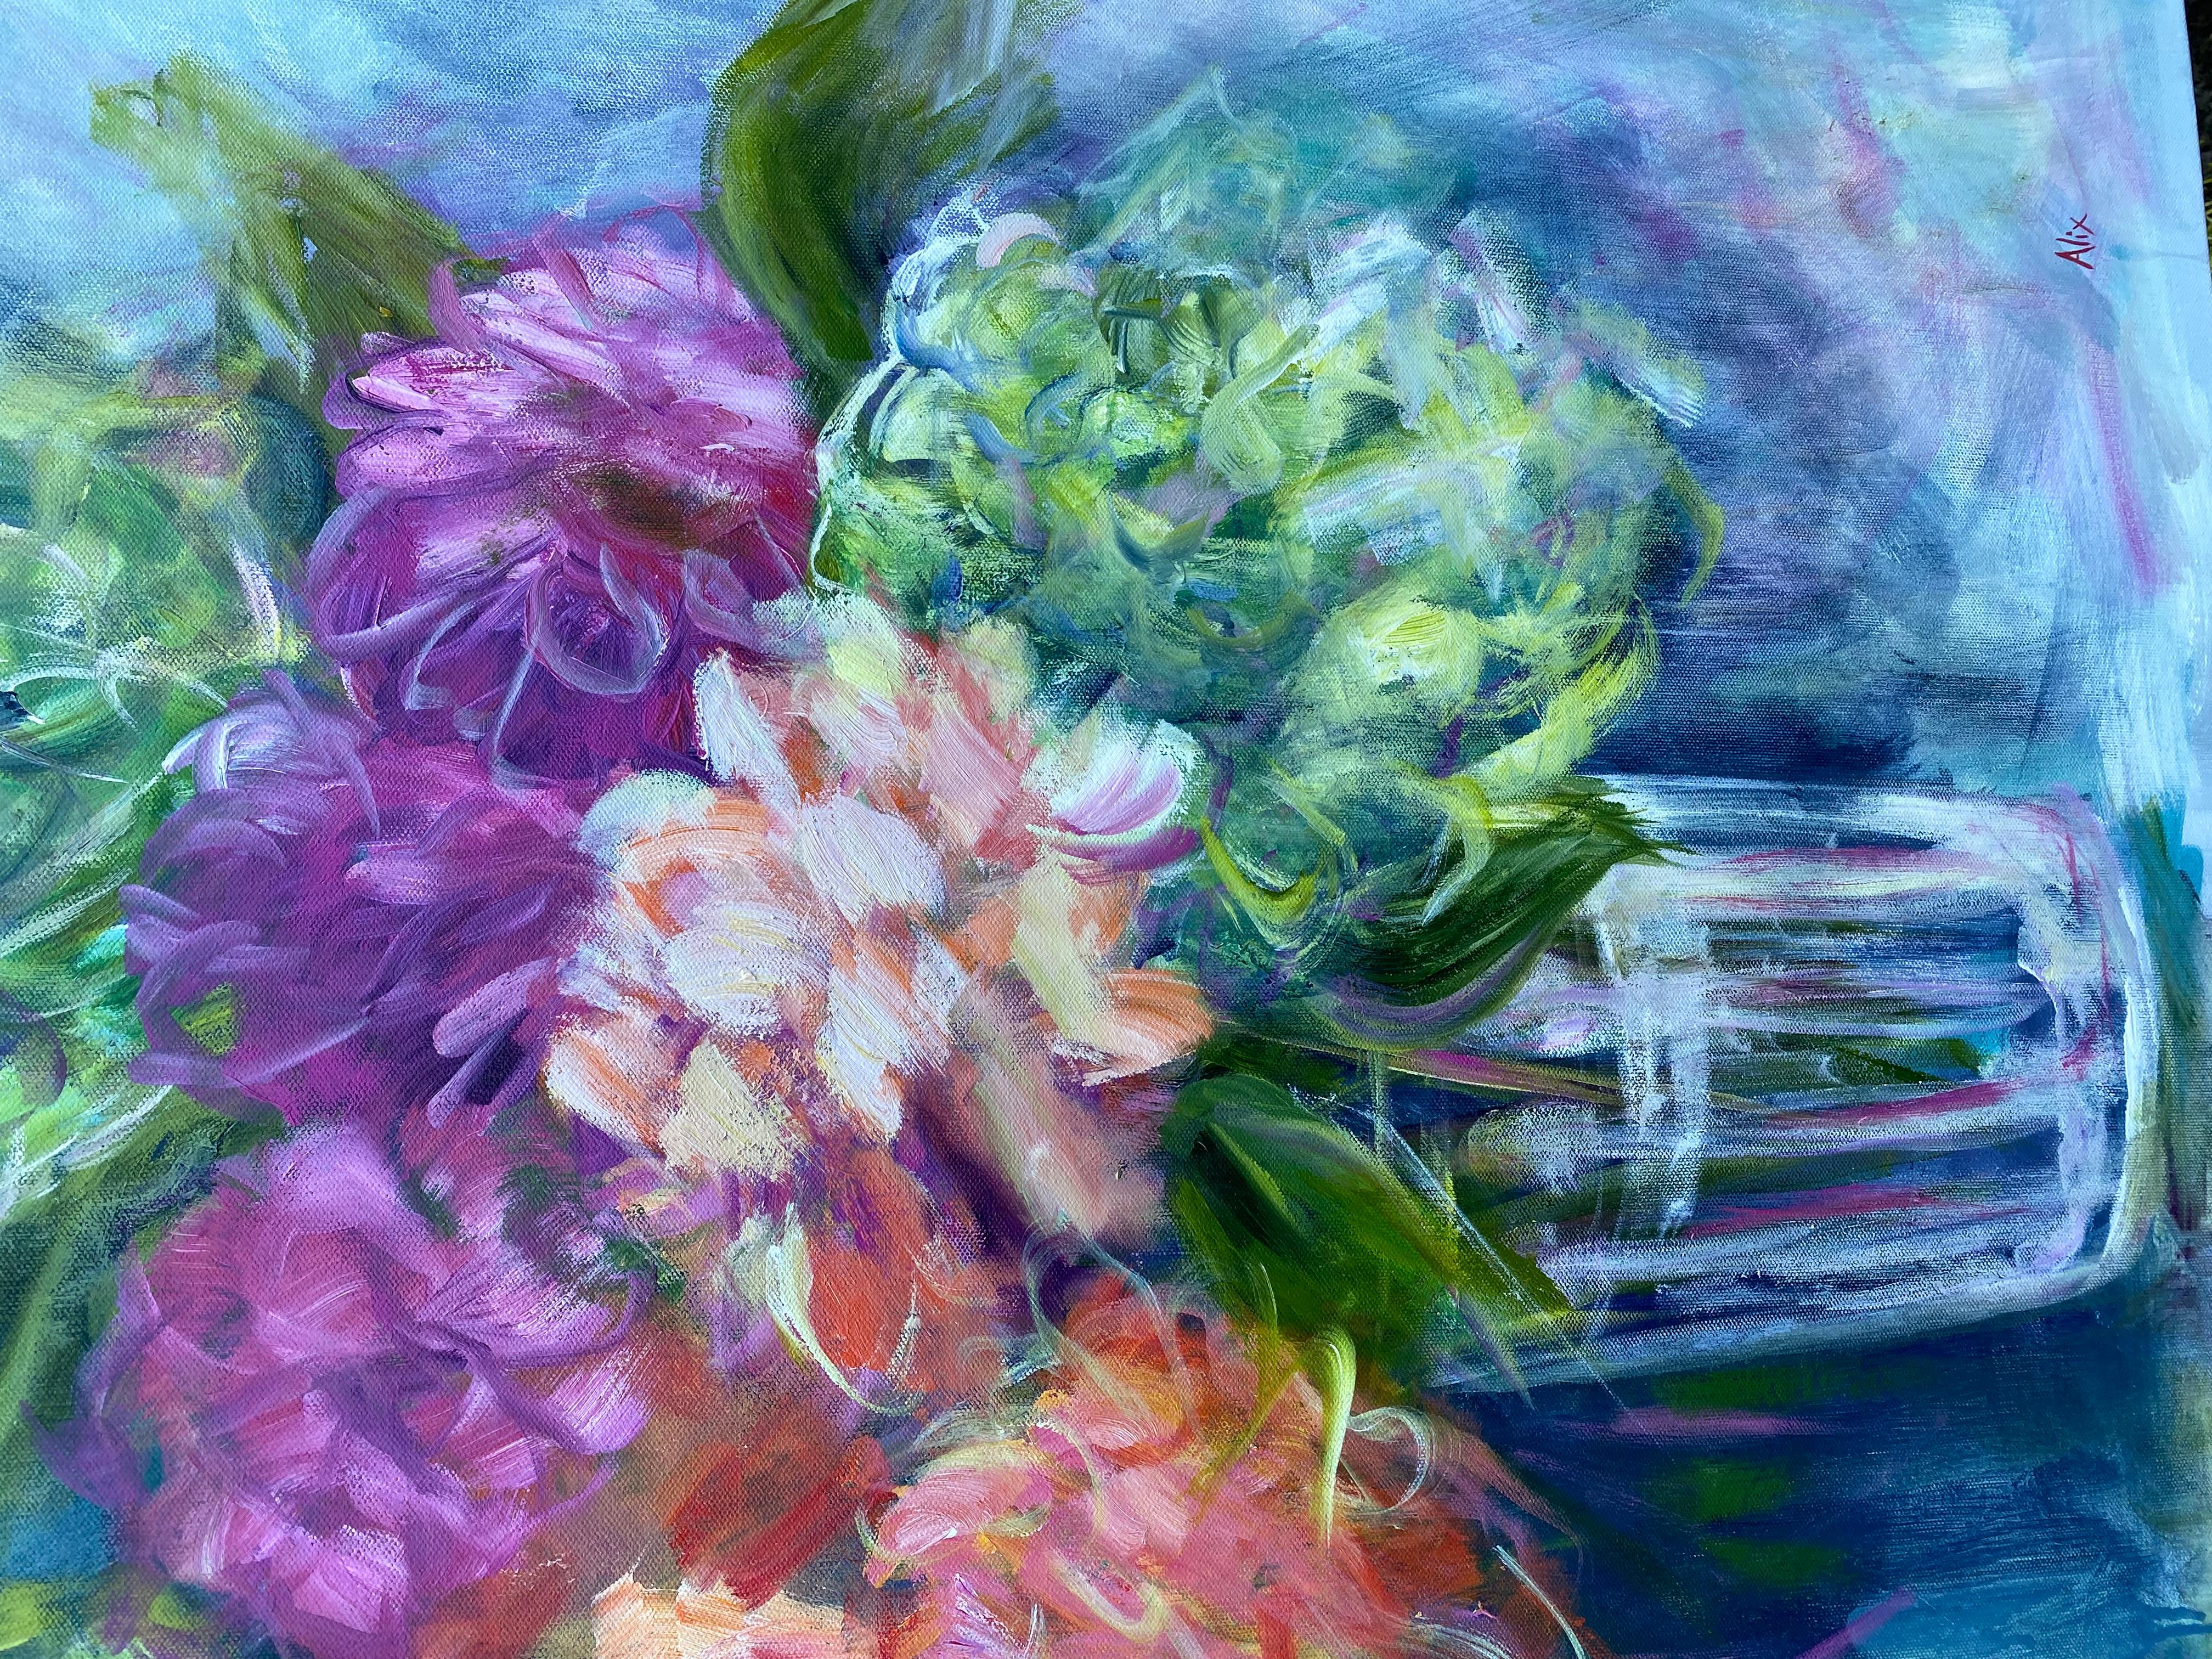 <p>Artist Comments<br>Vivid corals and pinks harmonize with cool blues and warm greens. Artist Alix Palo captures the charm of blooming flowers in this still life. She skillfully renders the assortment of blossoms with expressive line work and